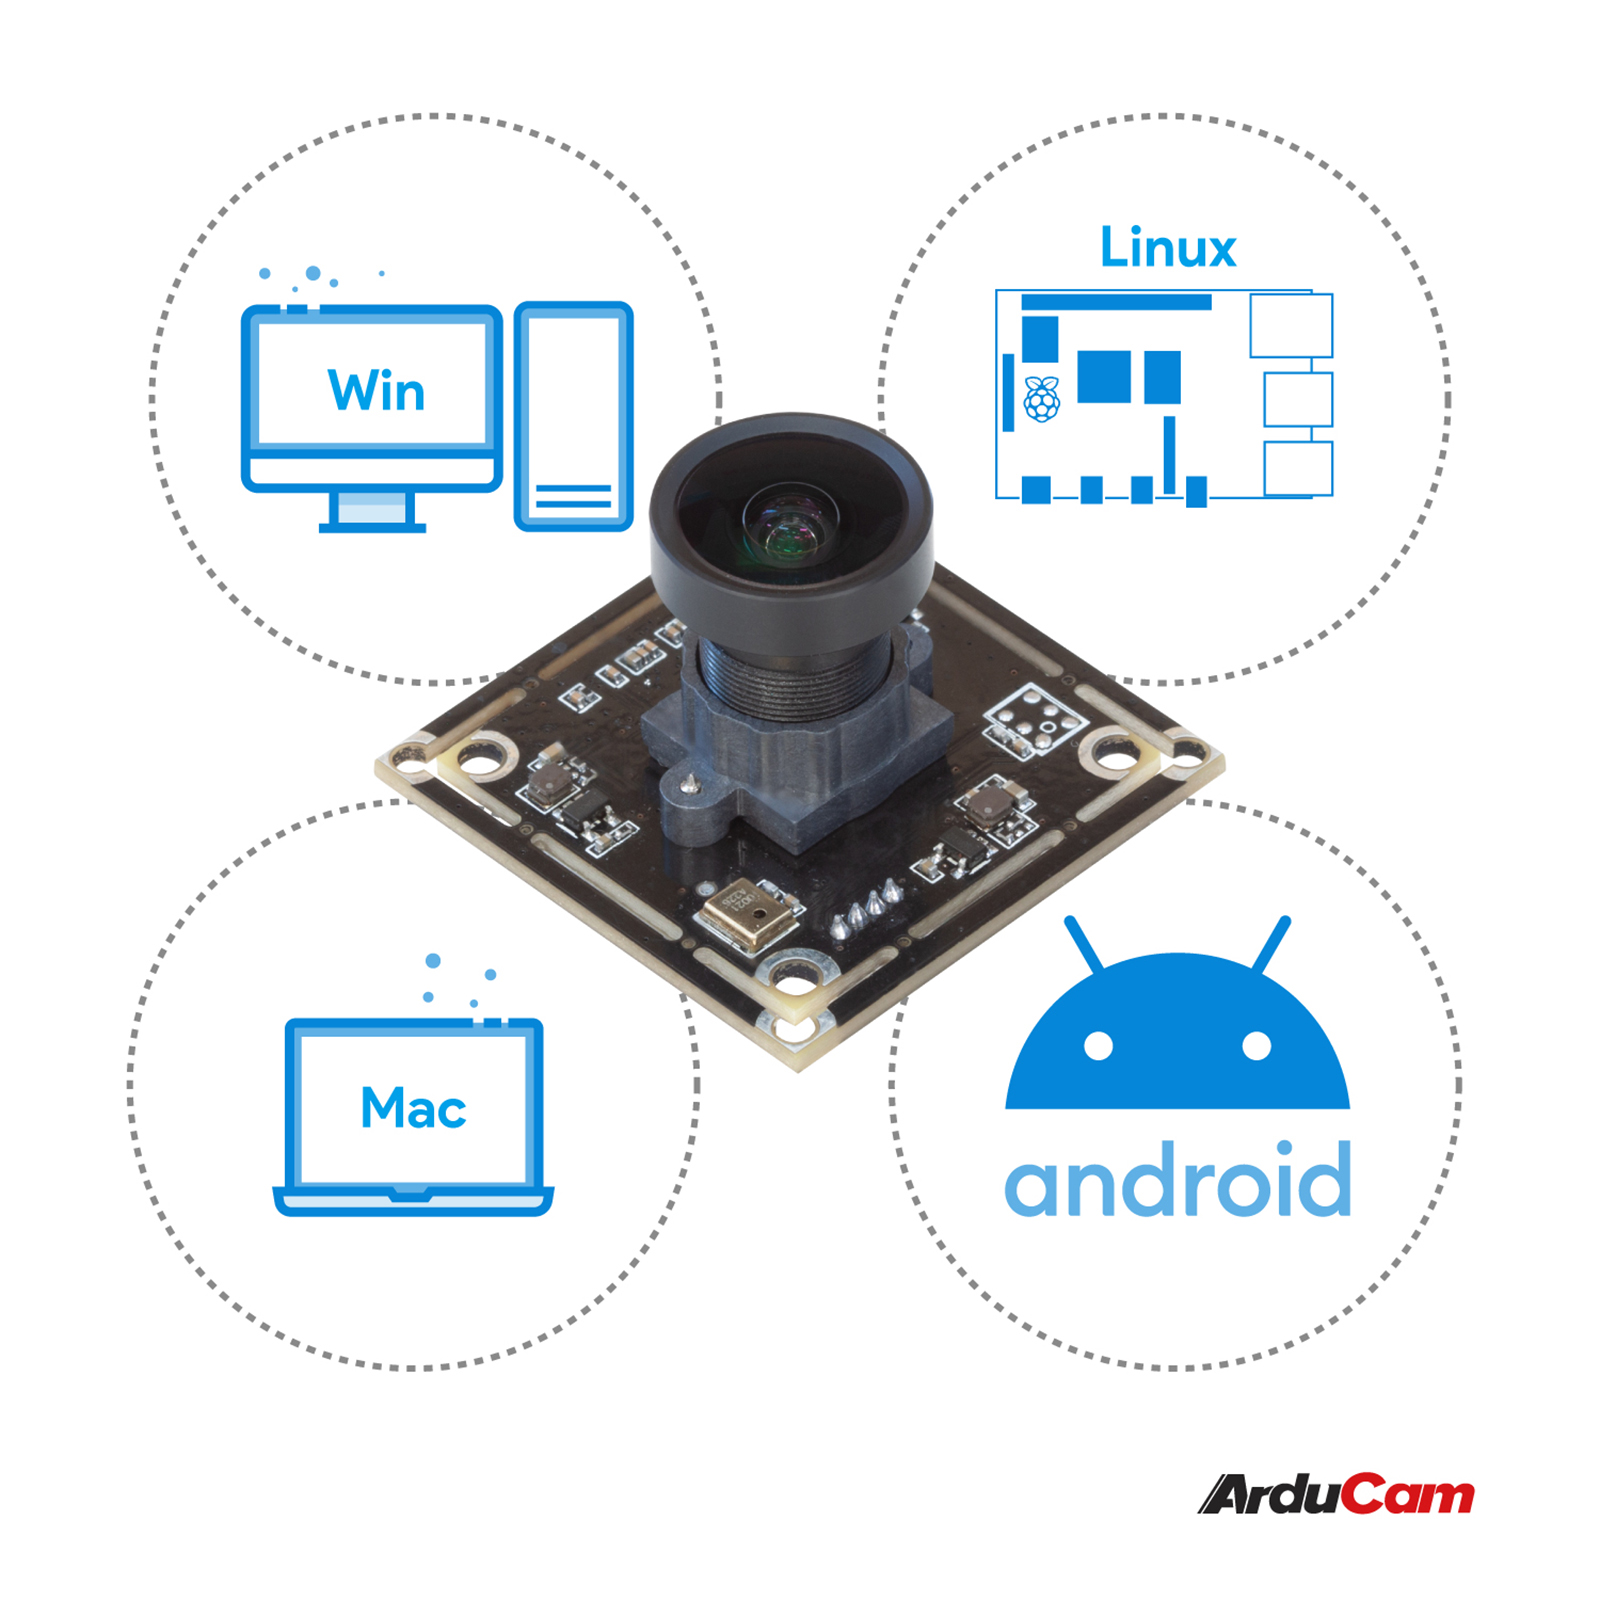 8MP IMX179 USB Module with Wide 115°(H) M12 Lens for Windows, Linux, Android, and Mac OS - Arducam